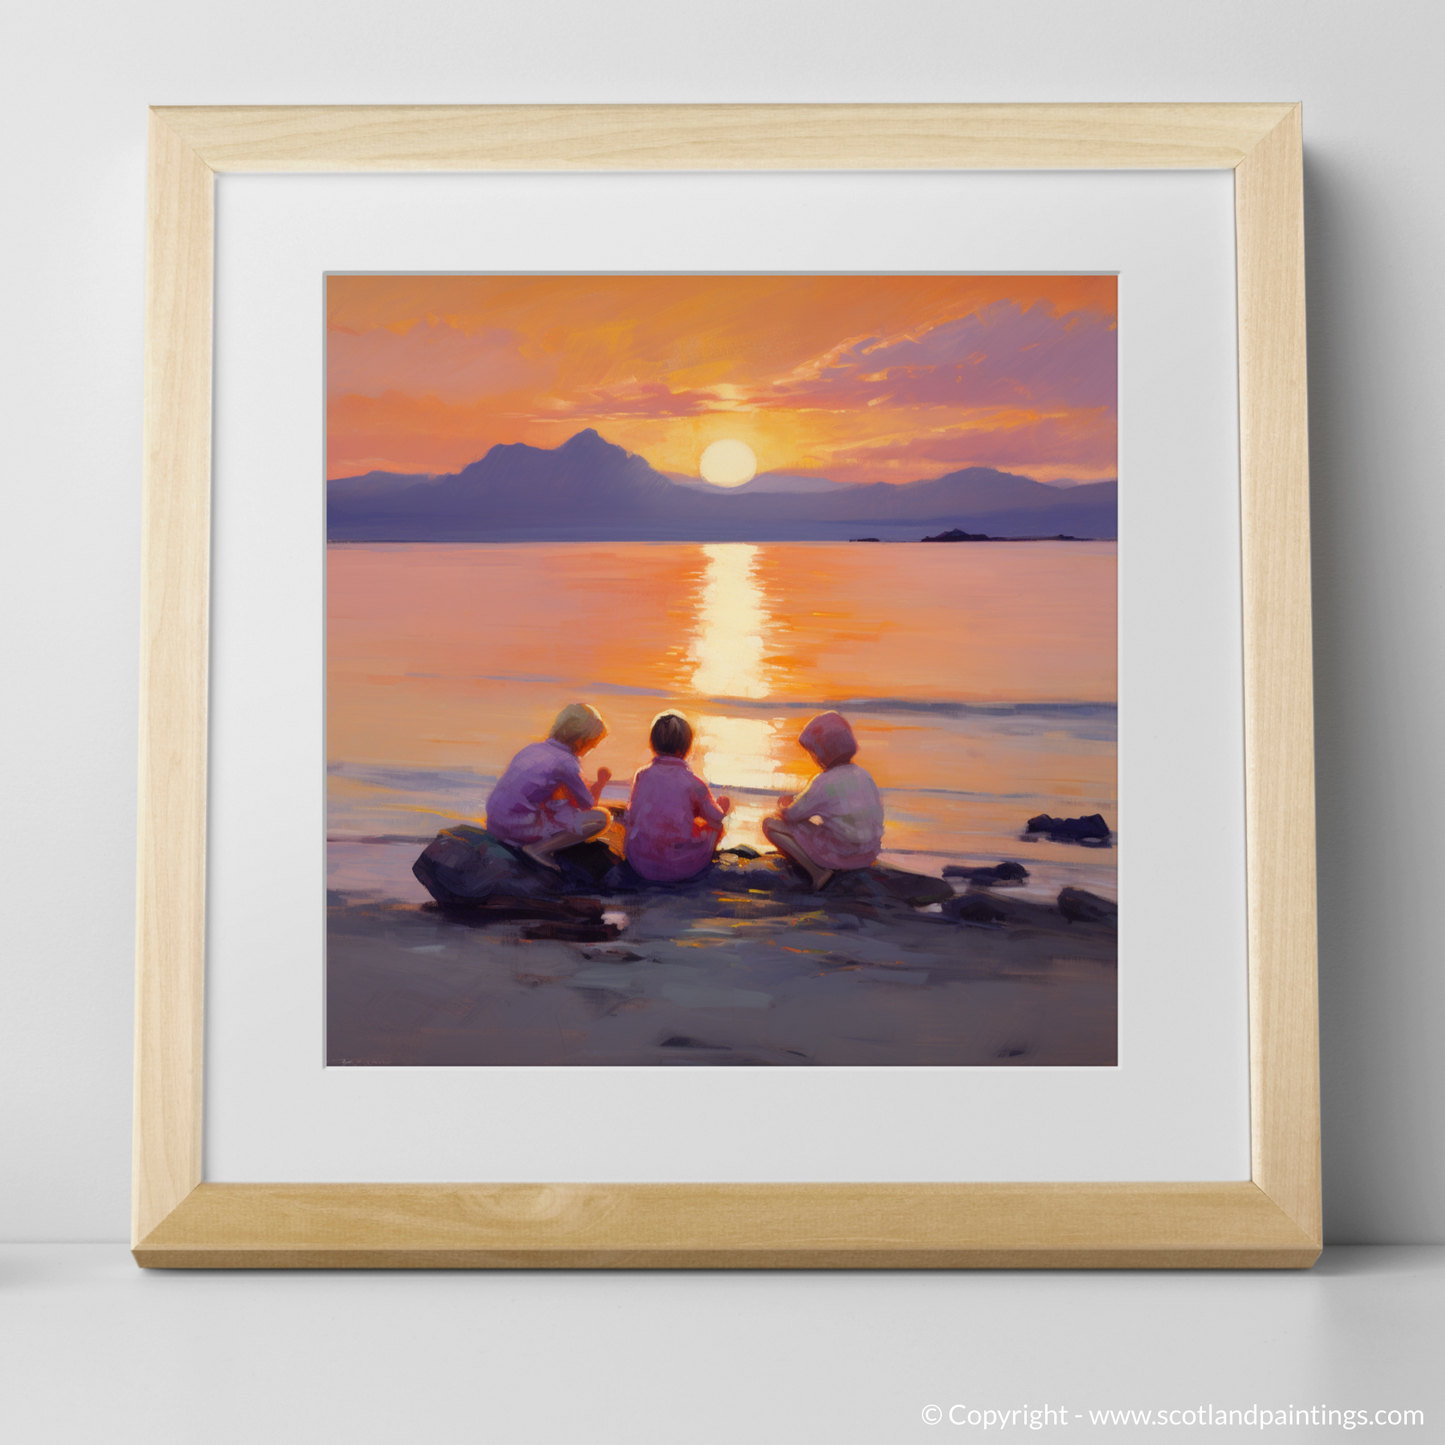 Art Print of Young explorers watching the sunset over the Isle of Arran from the peaceful Saltcoats Beach with a natural frame